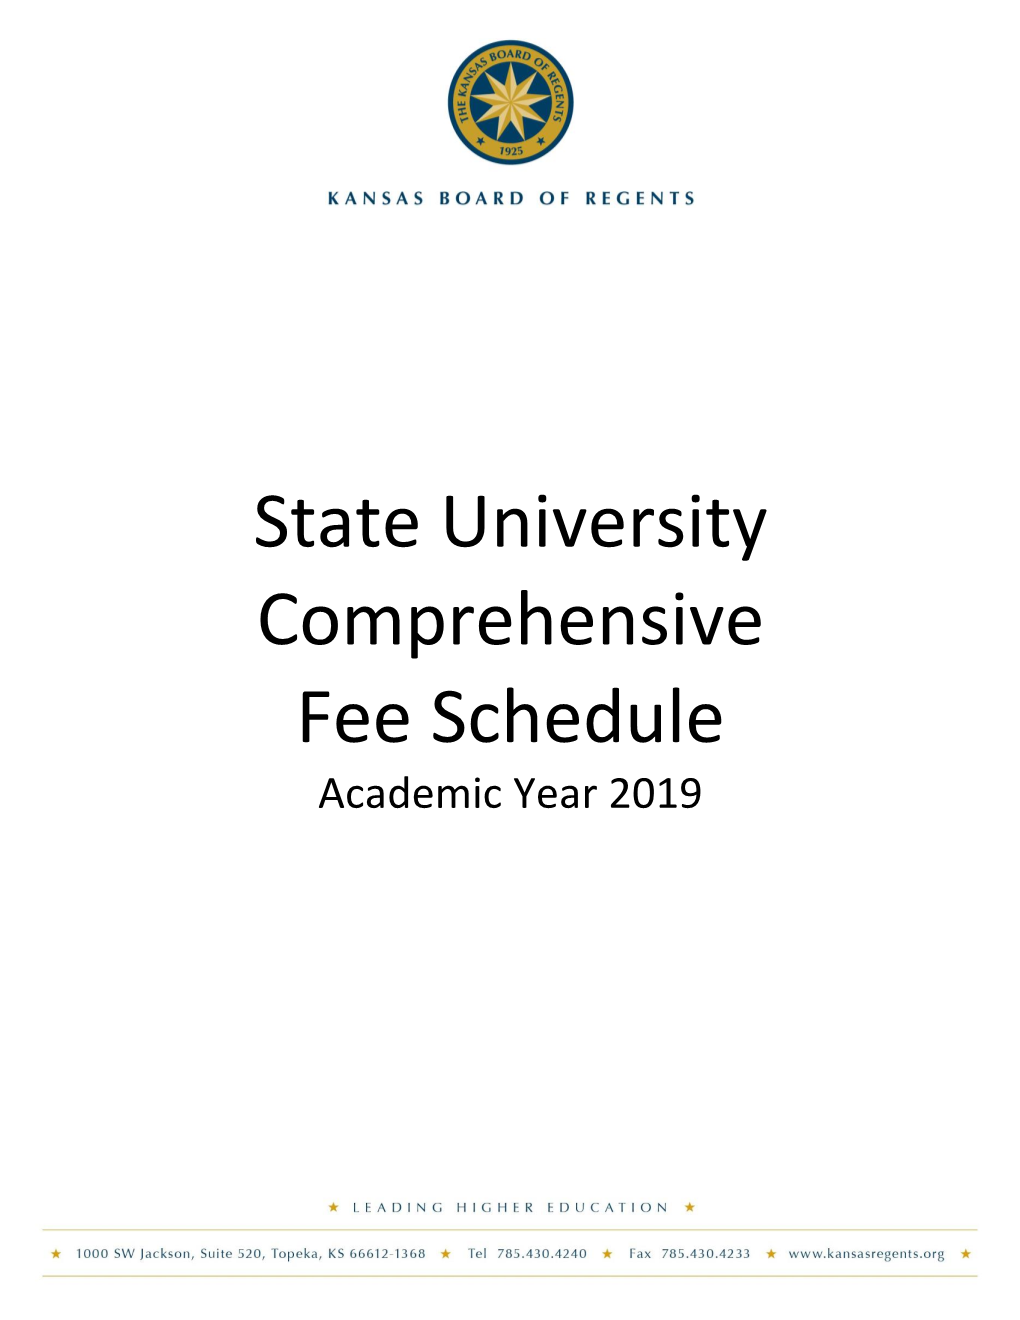 State University Comprehensive Fee Schedule Academic Year 2019